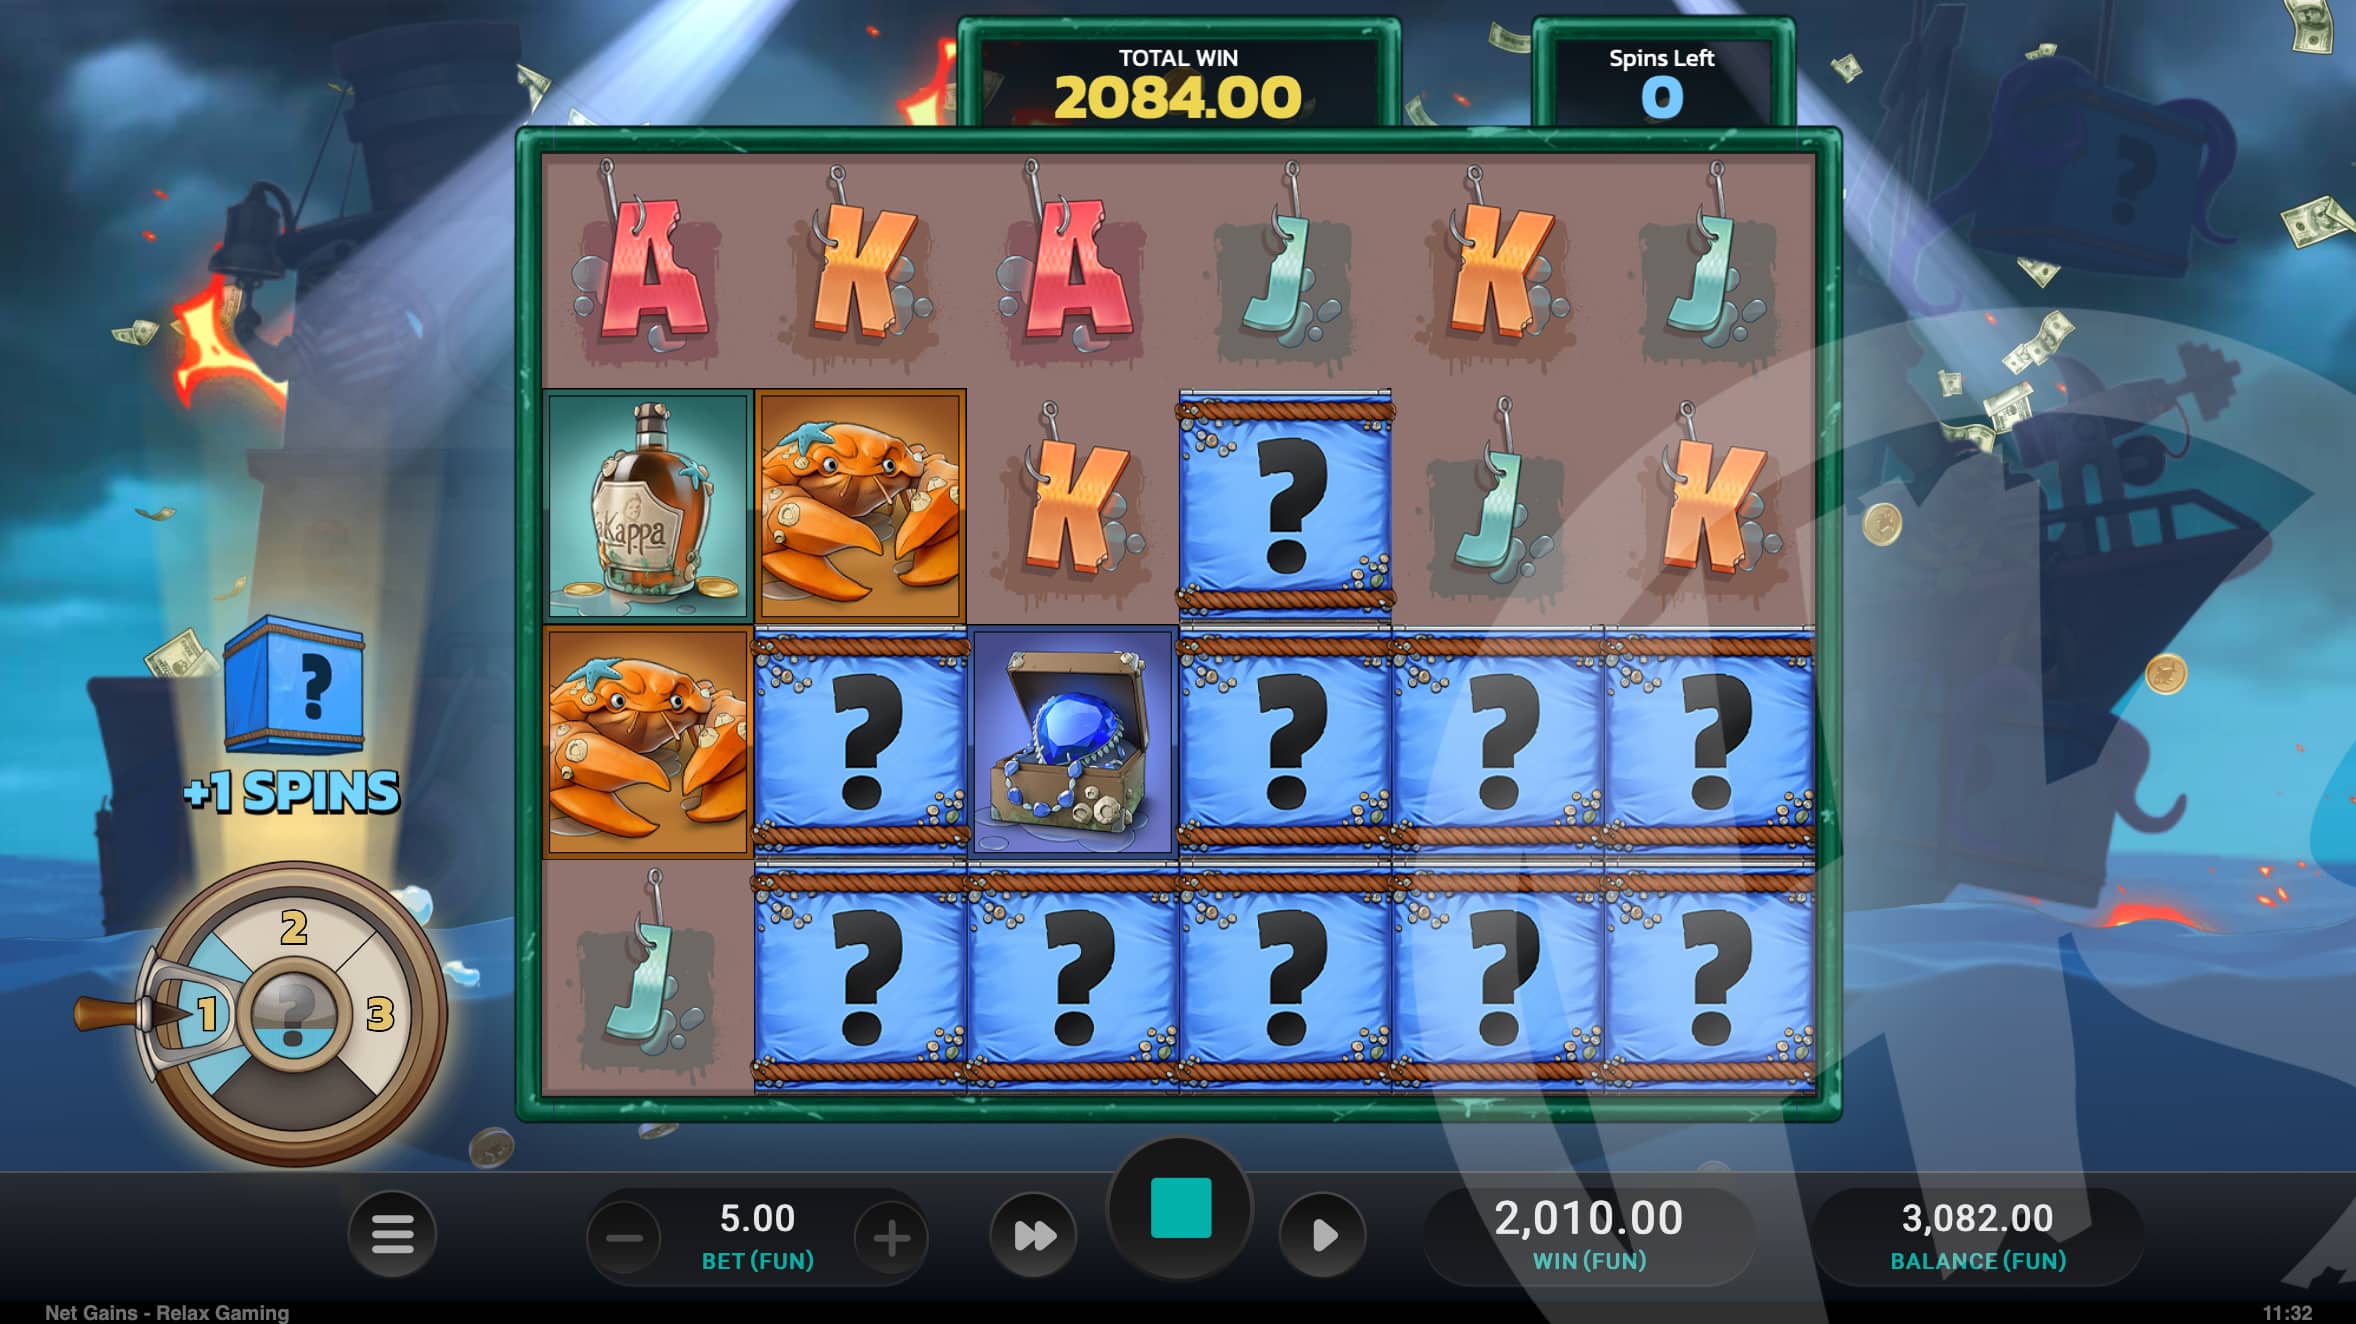 Net Gains Sticky Mystery Free Spins (Hot Mode)